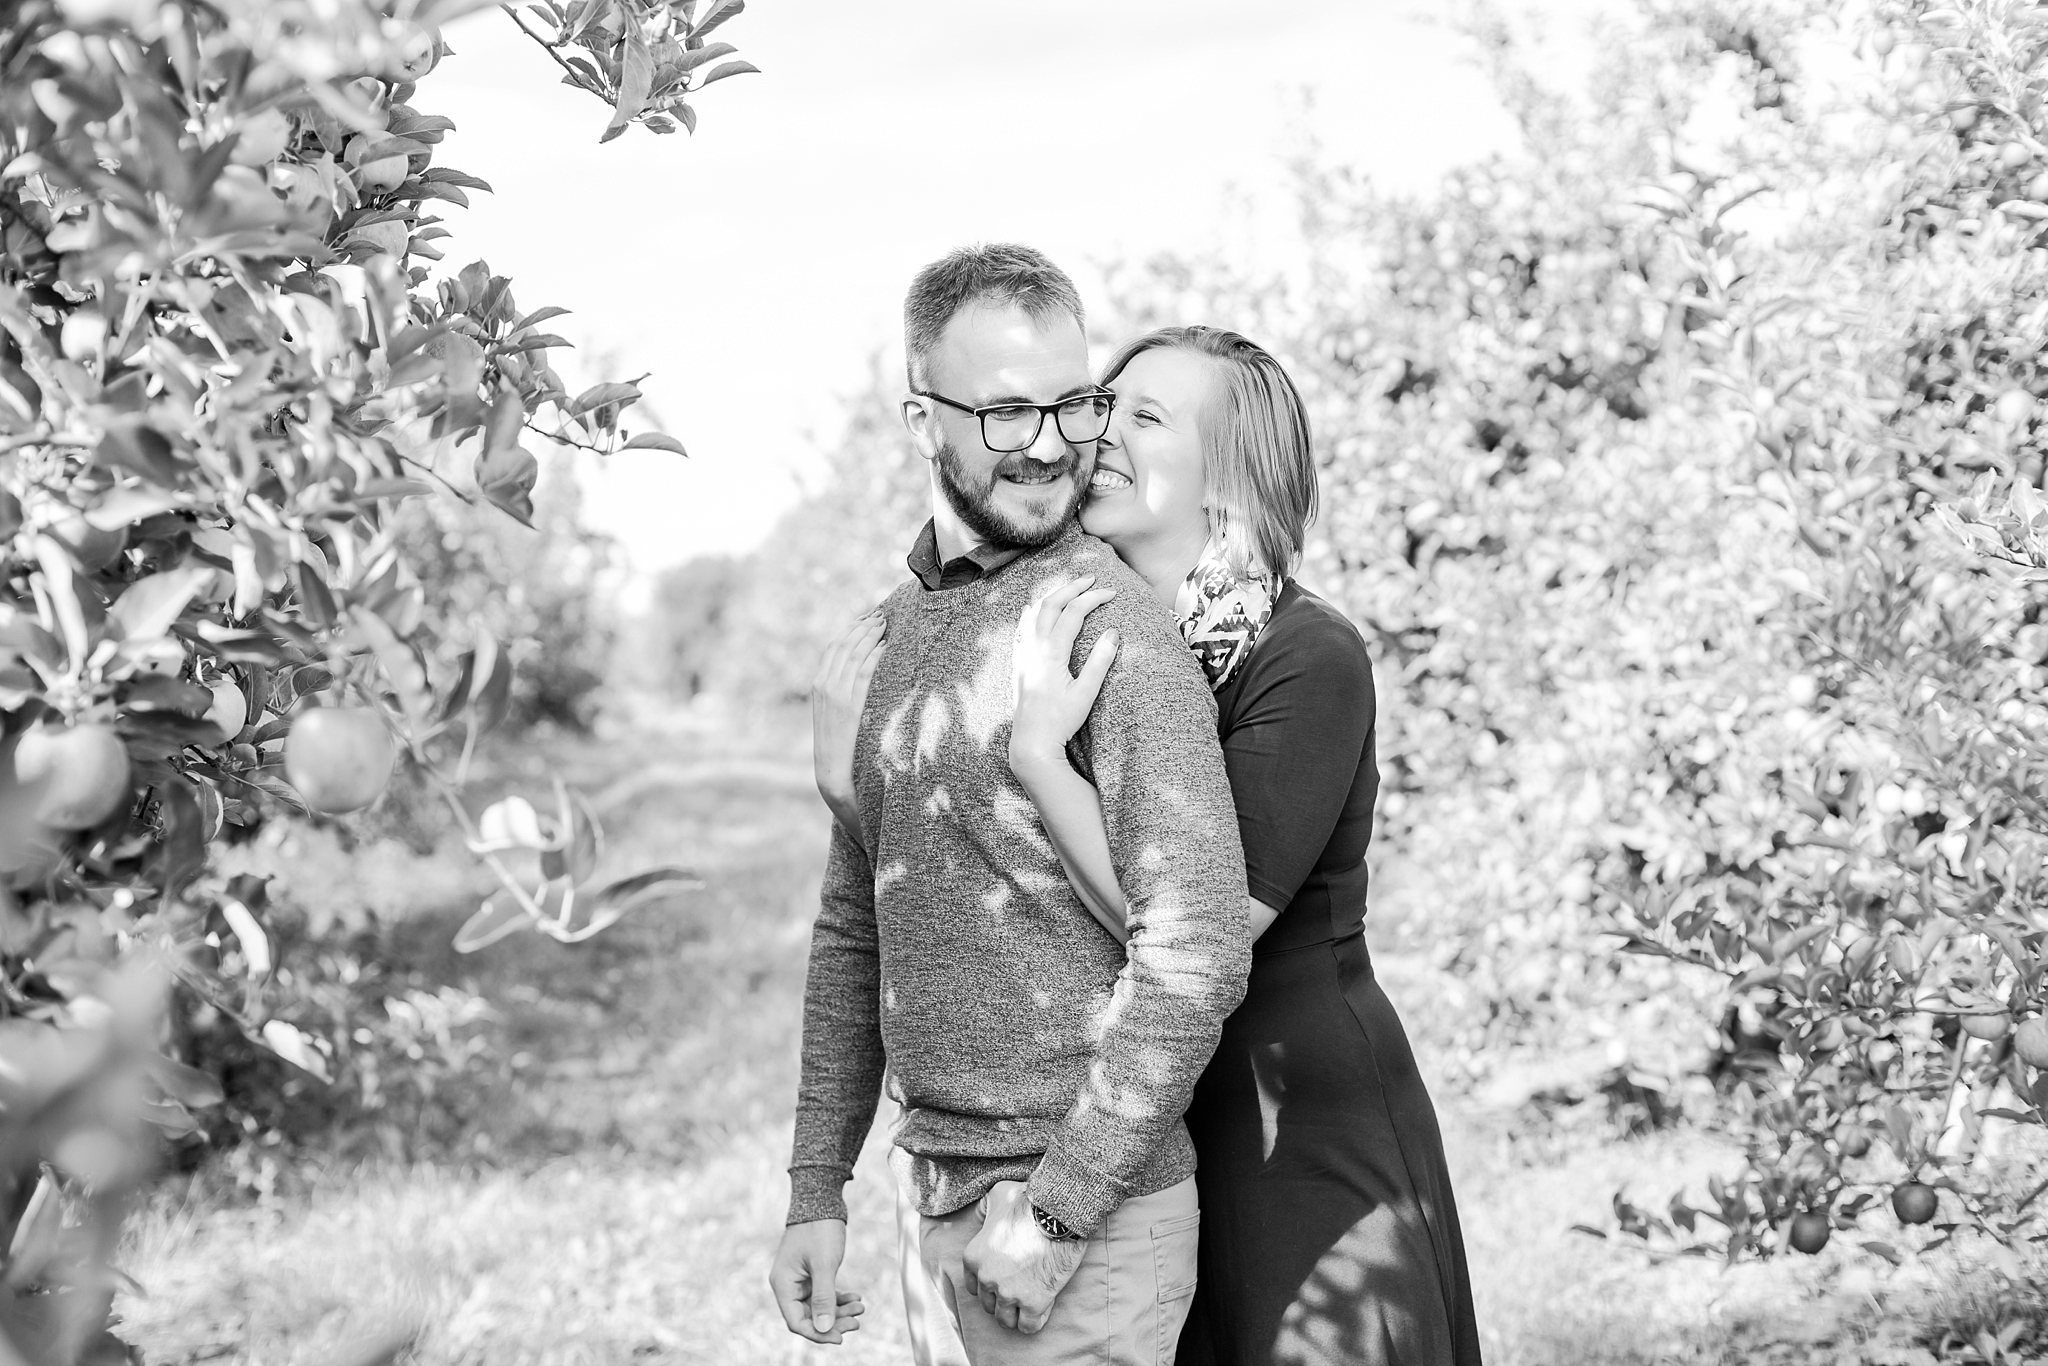 playful-fall-engagement-photos-at-hy's-cider-mill-ochard-in-bruce-township-michigan-by-courtney-carolyn-photography_0003.jpg